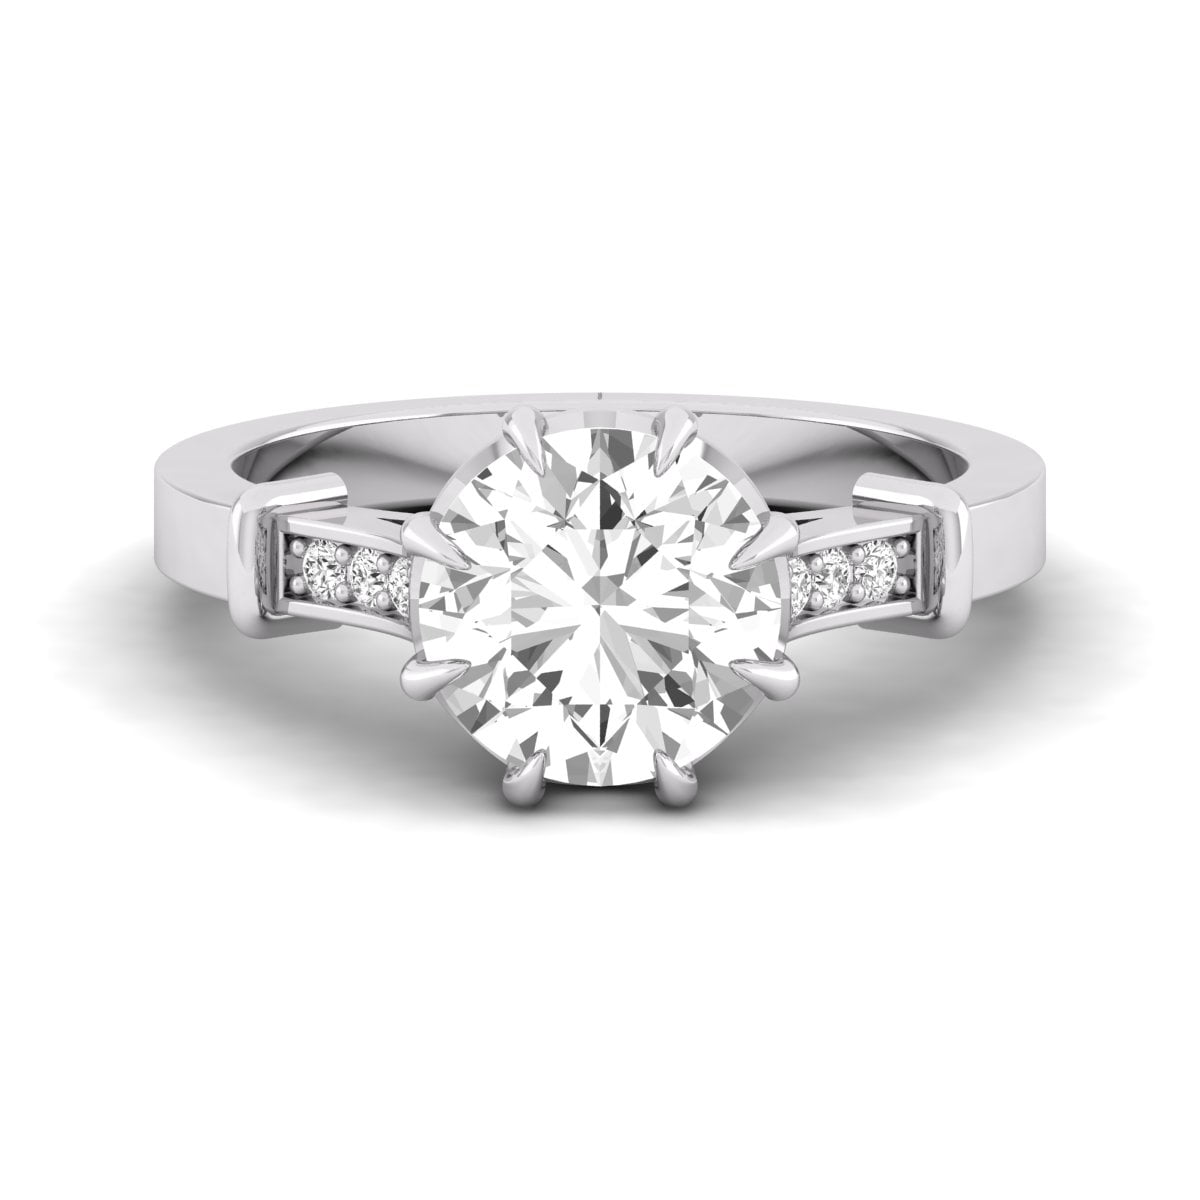 Round Cut Moissanite Claw Setting Seven Stone Engagement Ring For Women (2 5/6 TCW)